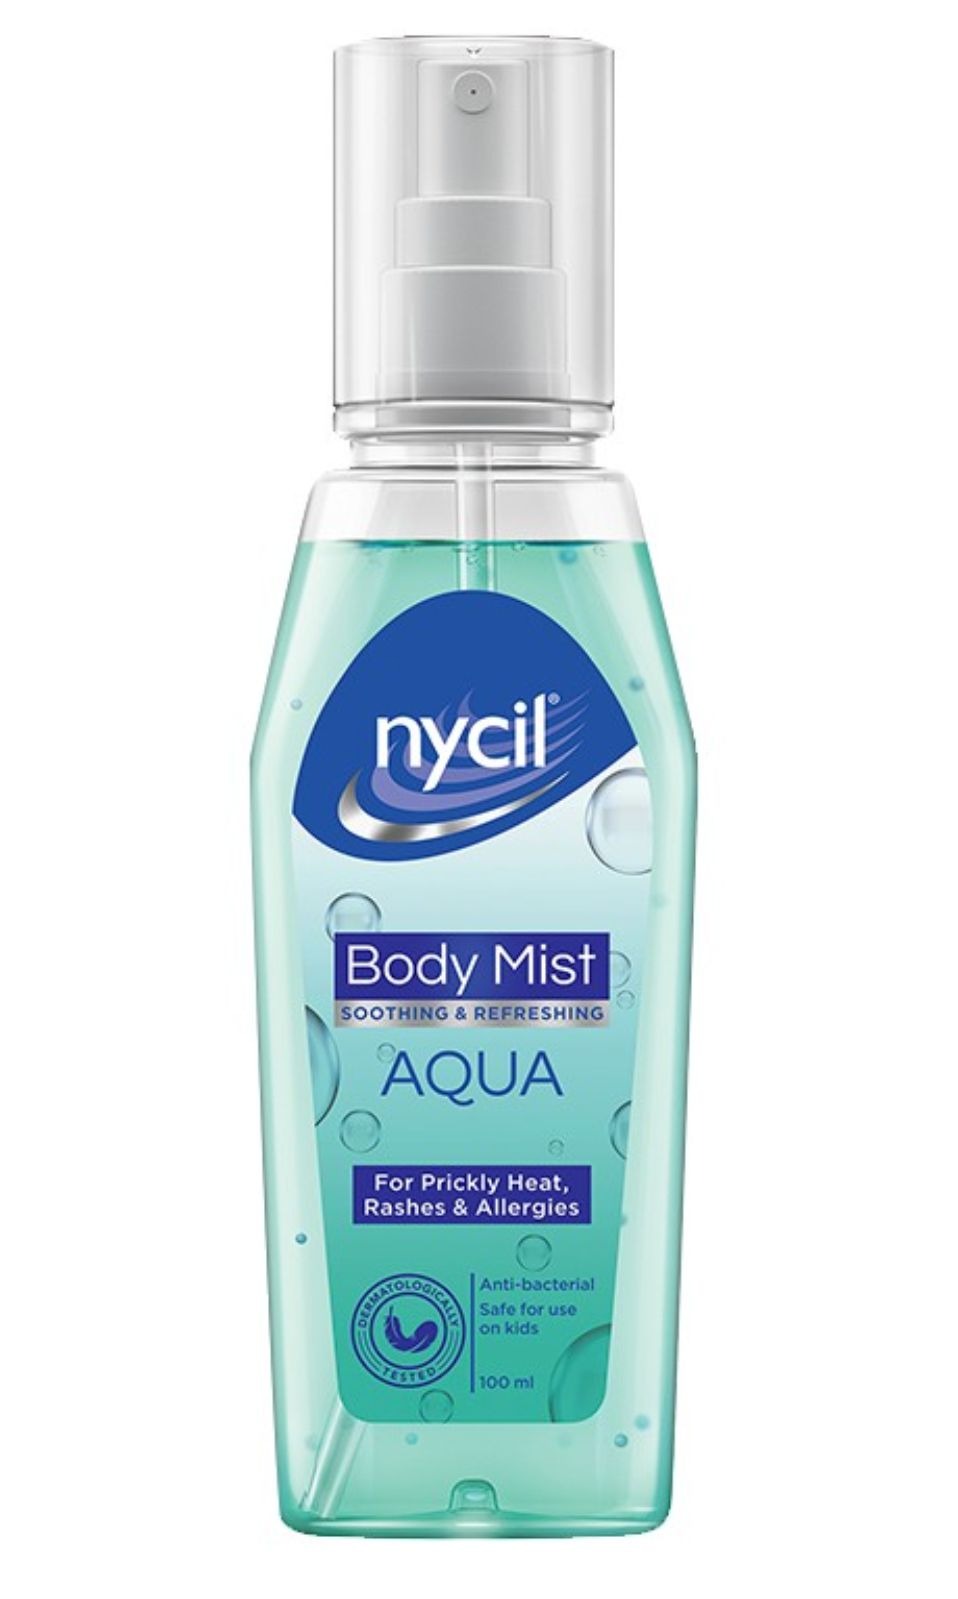 Nycil Body Mist - Soothing & Refreshing, For Prickly Heat, Rashes & Allergies, Aqua, 100 ml Bottle